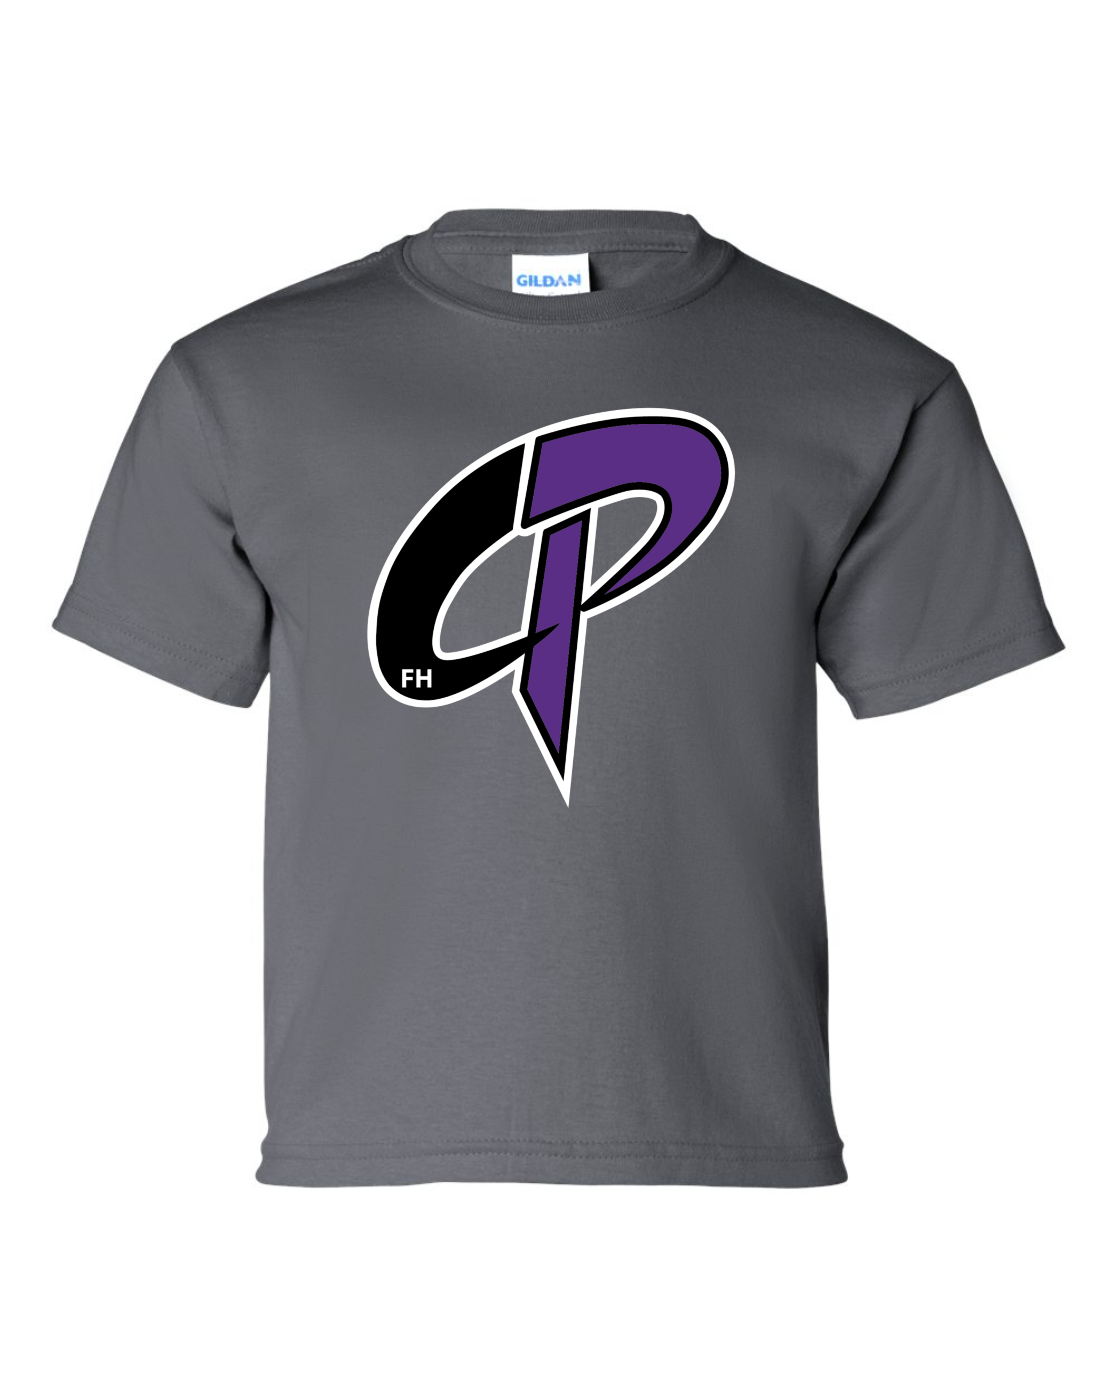 CPFH Standard Youth Cotton Tee